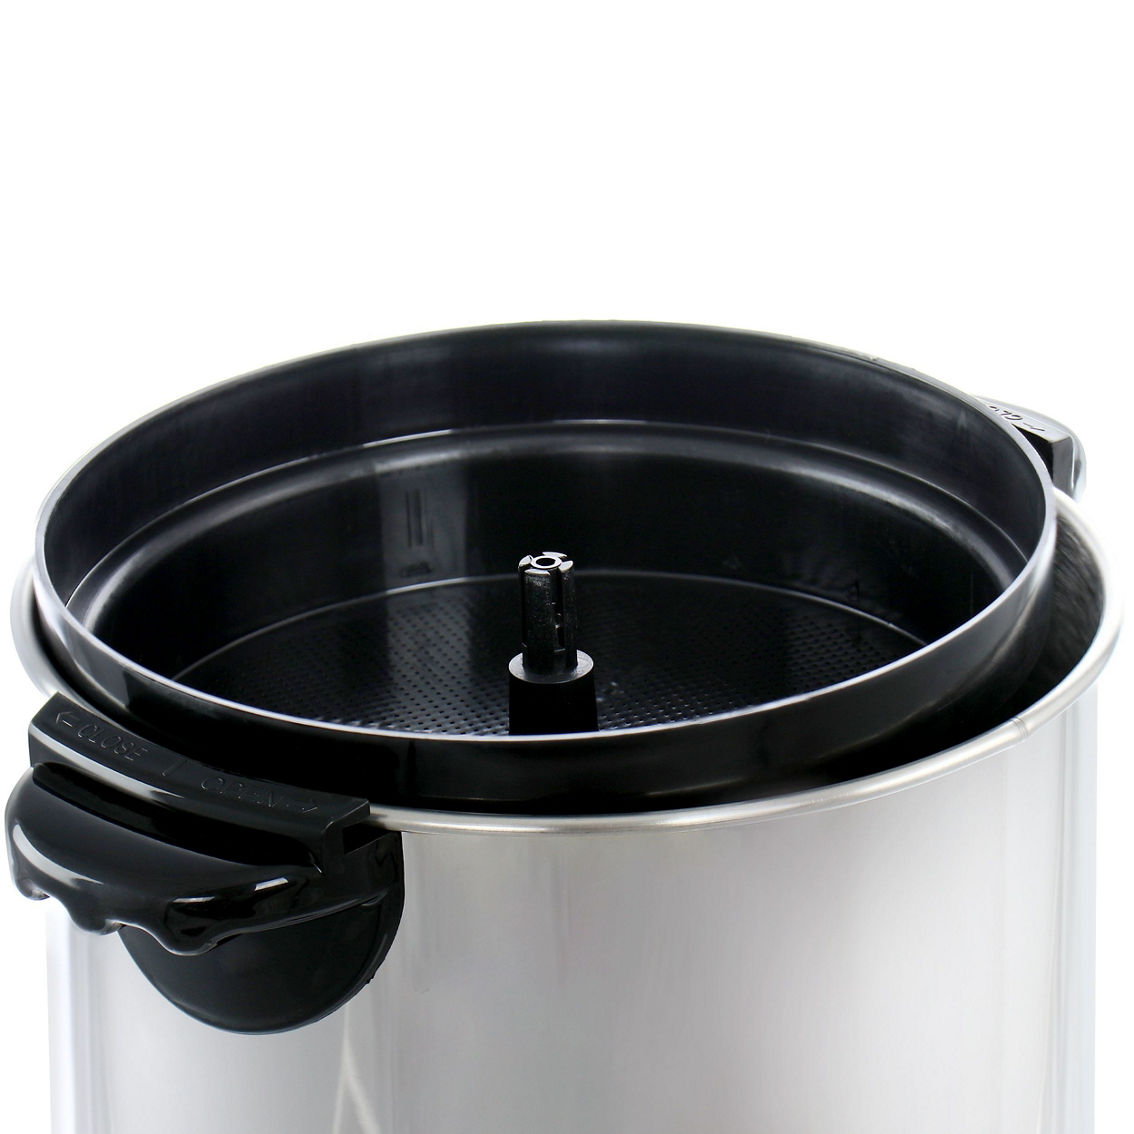 MegaChef 30 Cup Stainless Steel Coffee Urn - Image 4 of 5